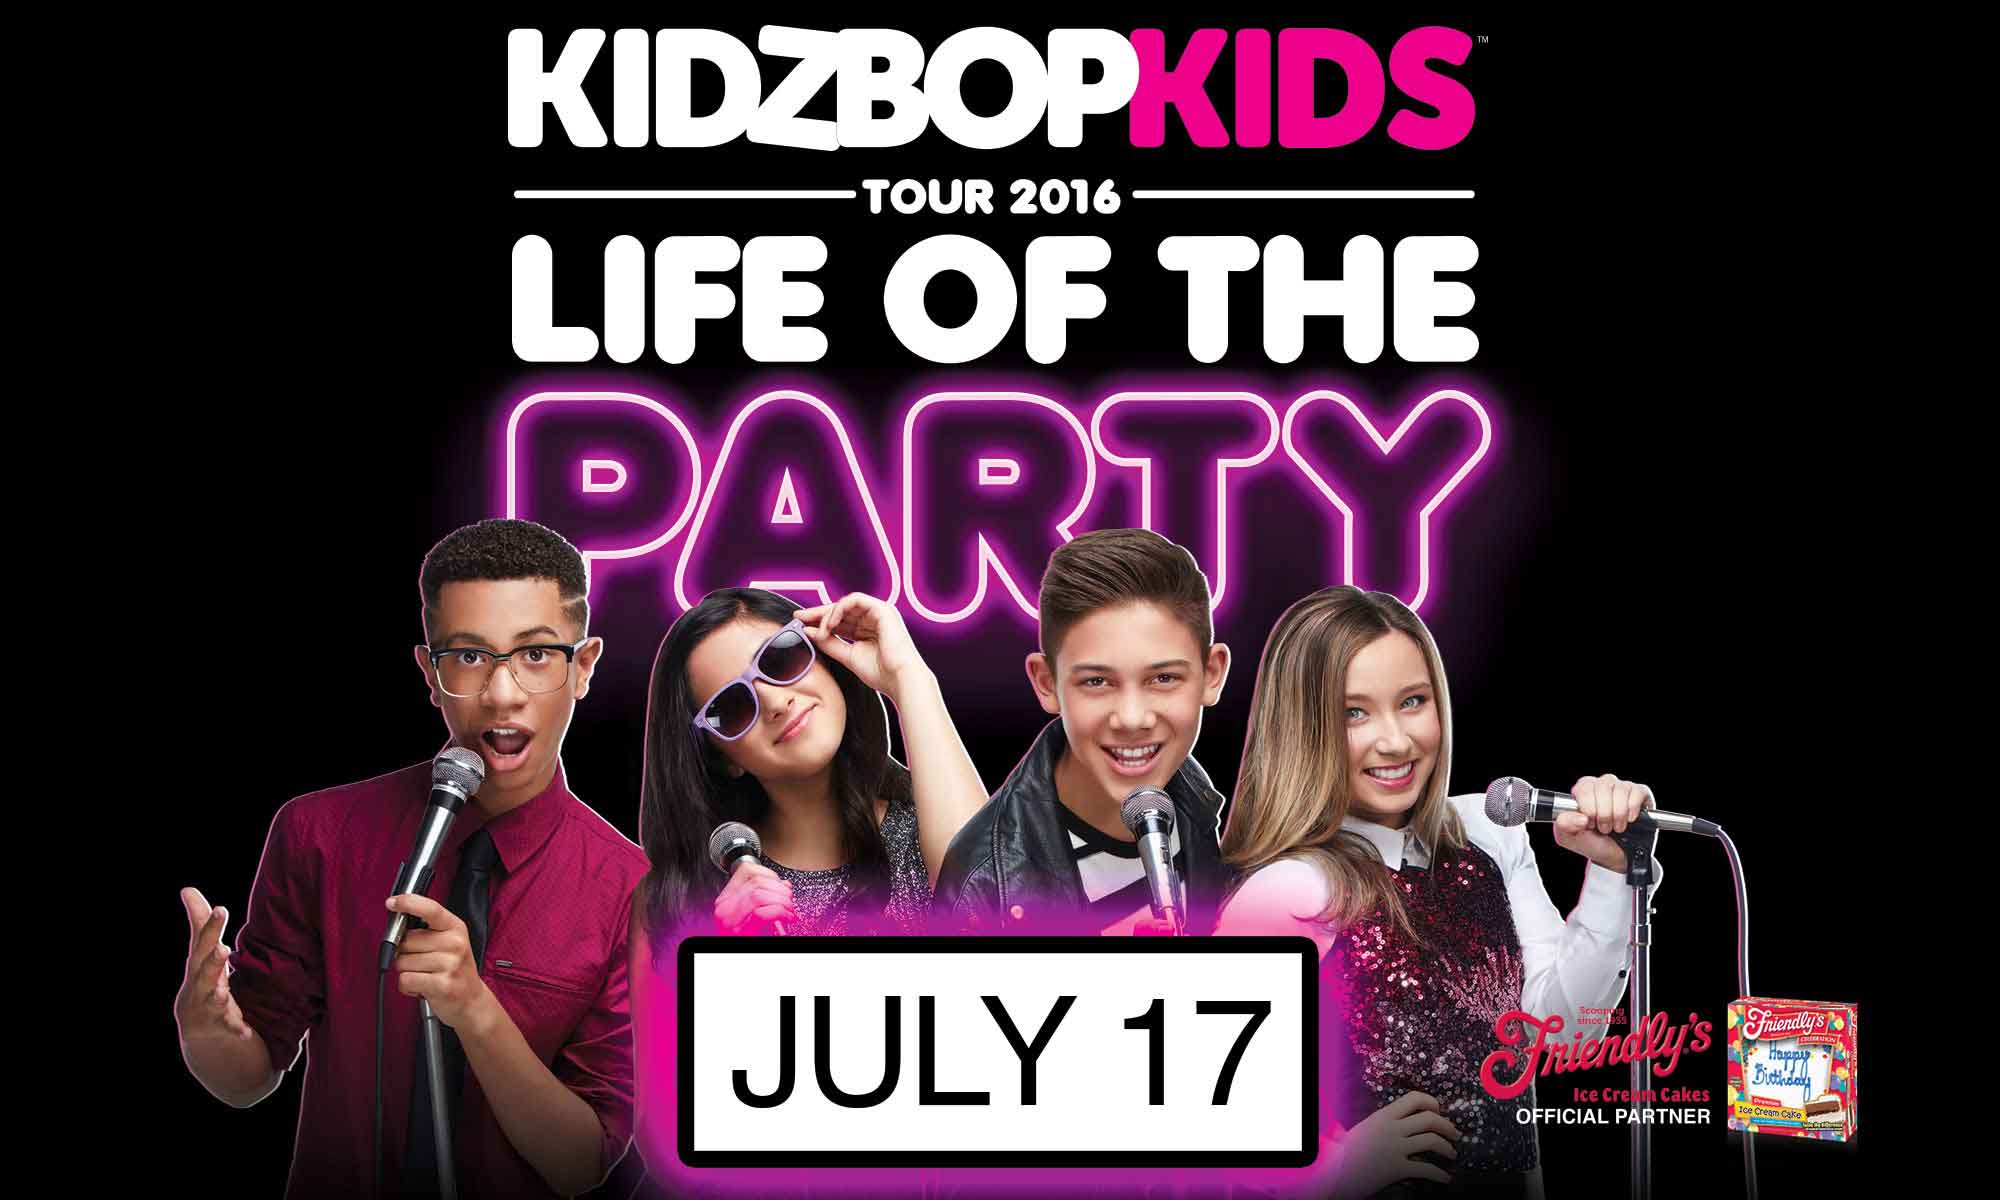 KIDZ BOP Kids: Life of the Party Tour at Coney Island Amphitheater on 07-17-16